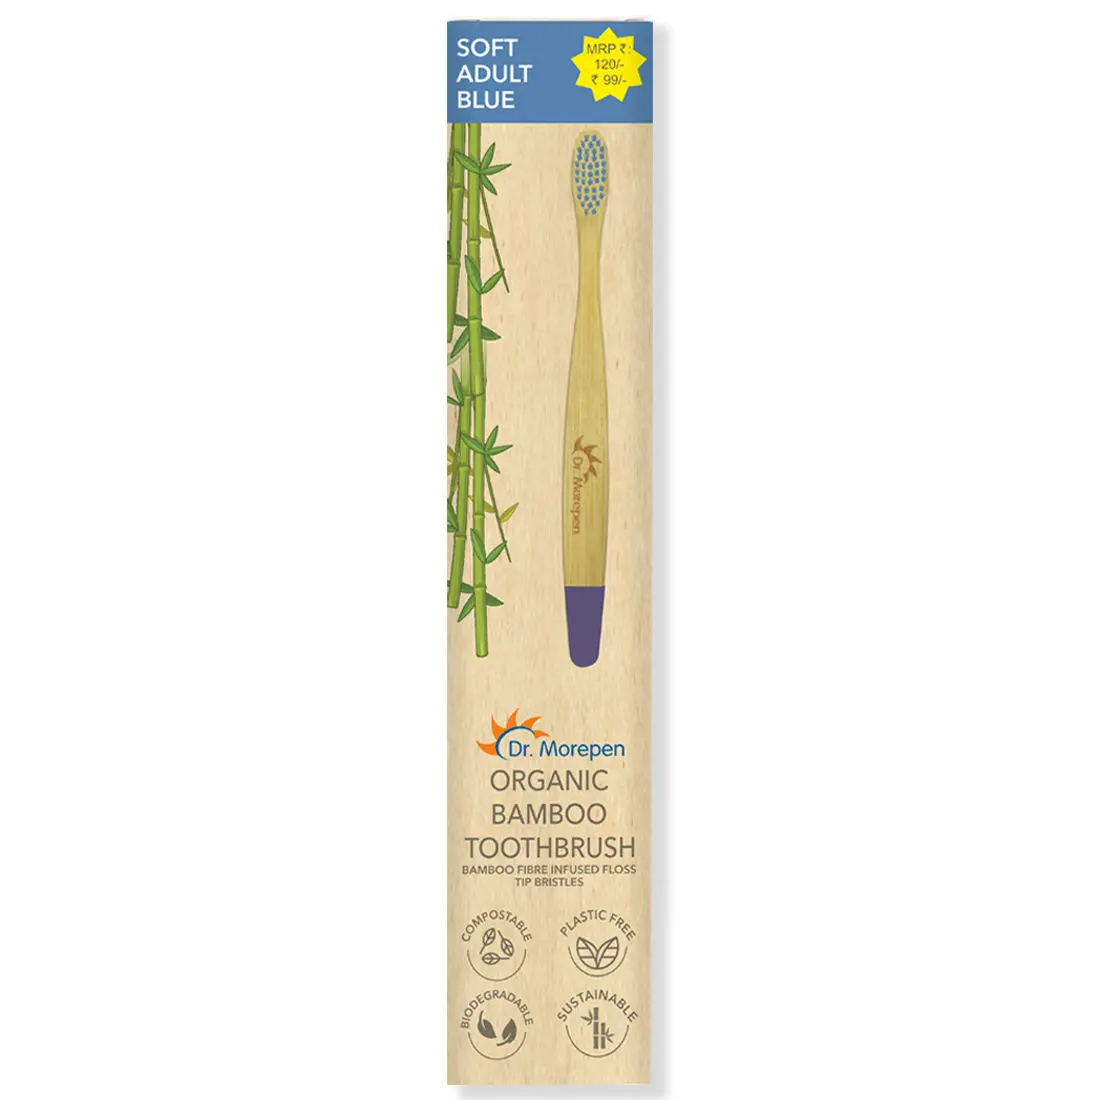 DR. MOREPEN Organic Bamboo Toothbrush For Adults - Blue